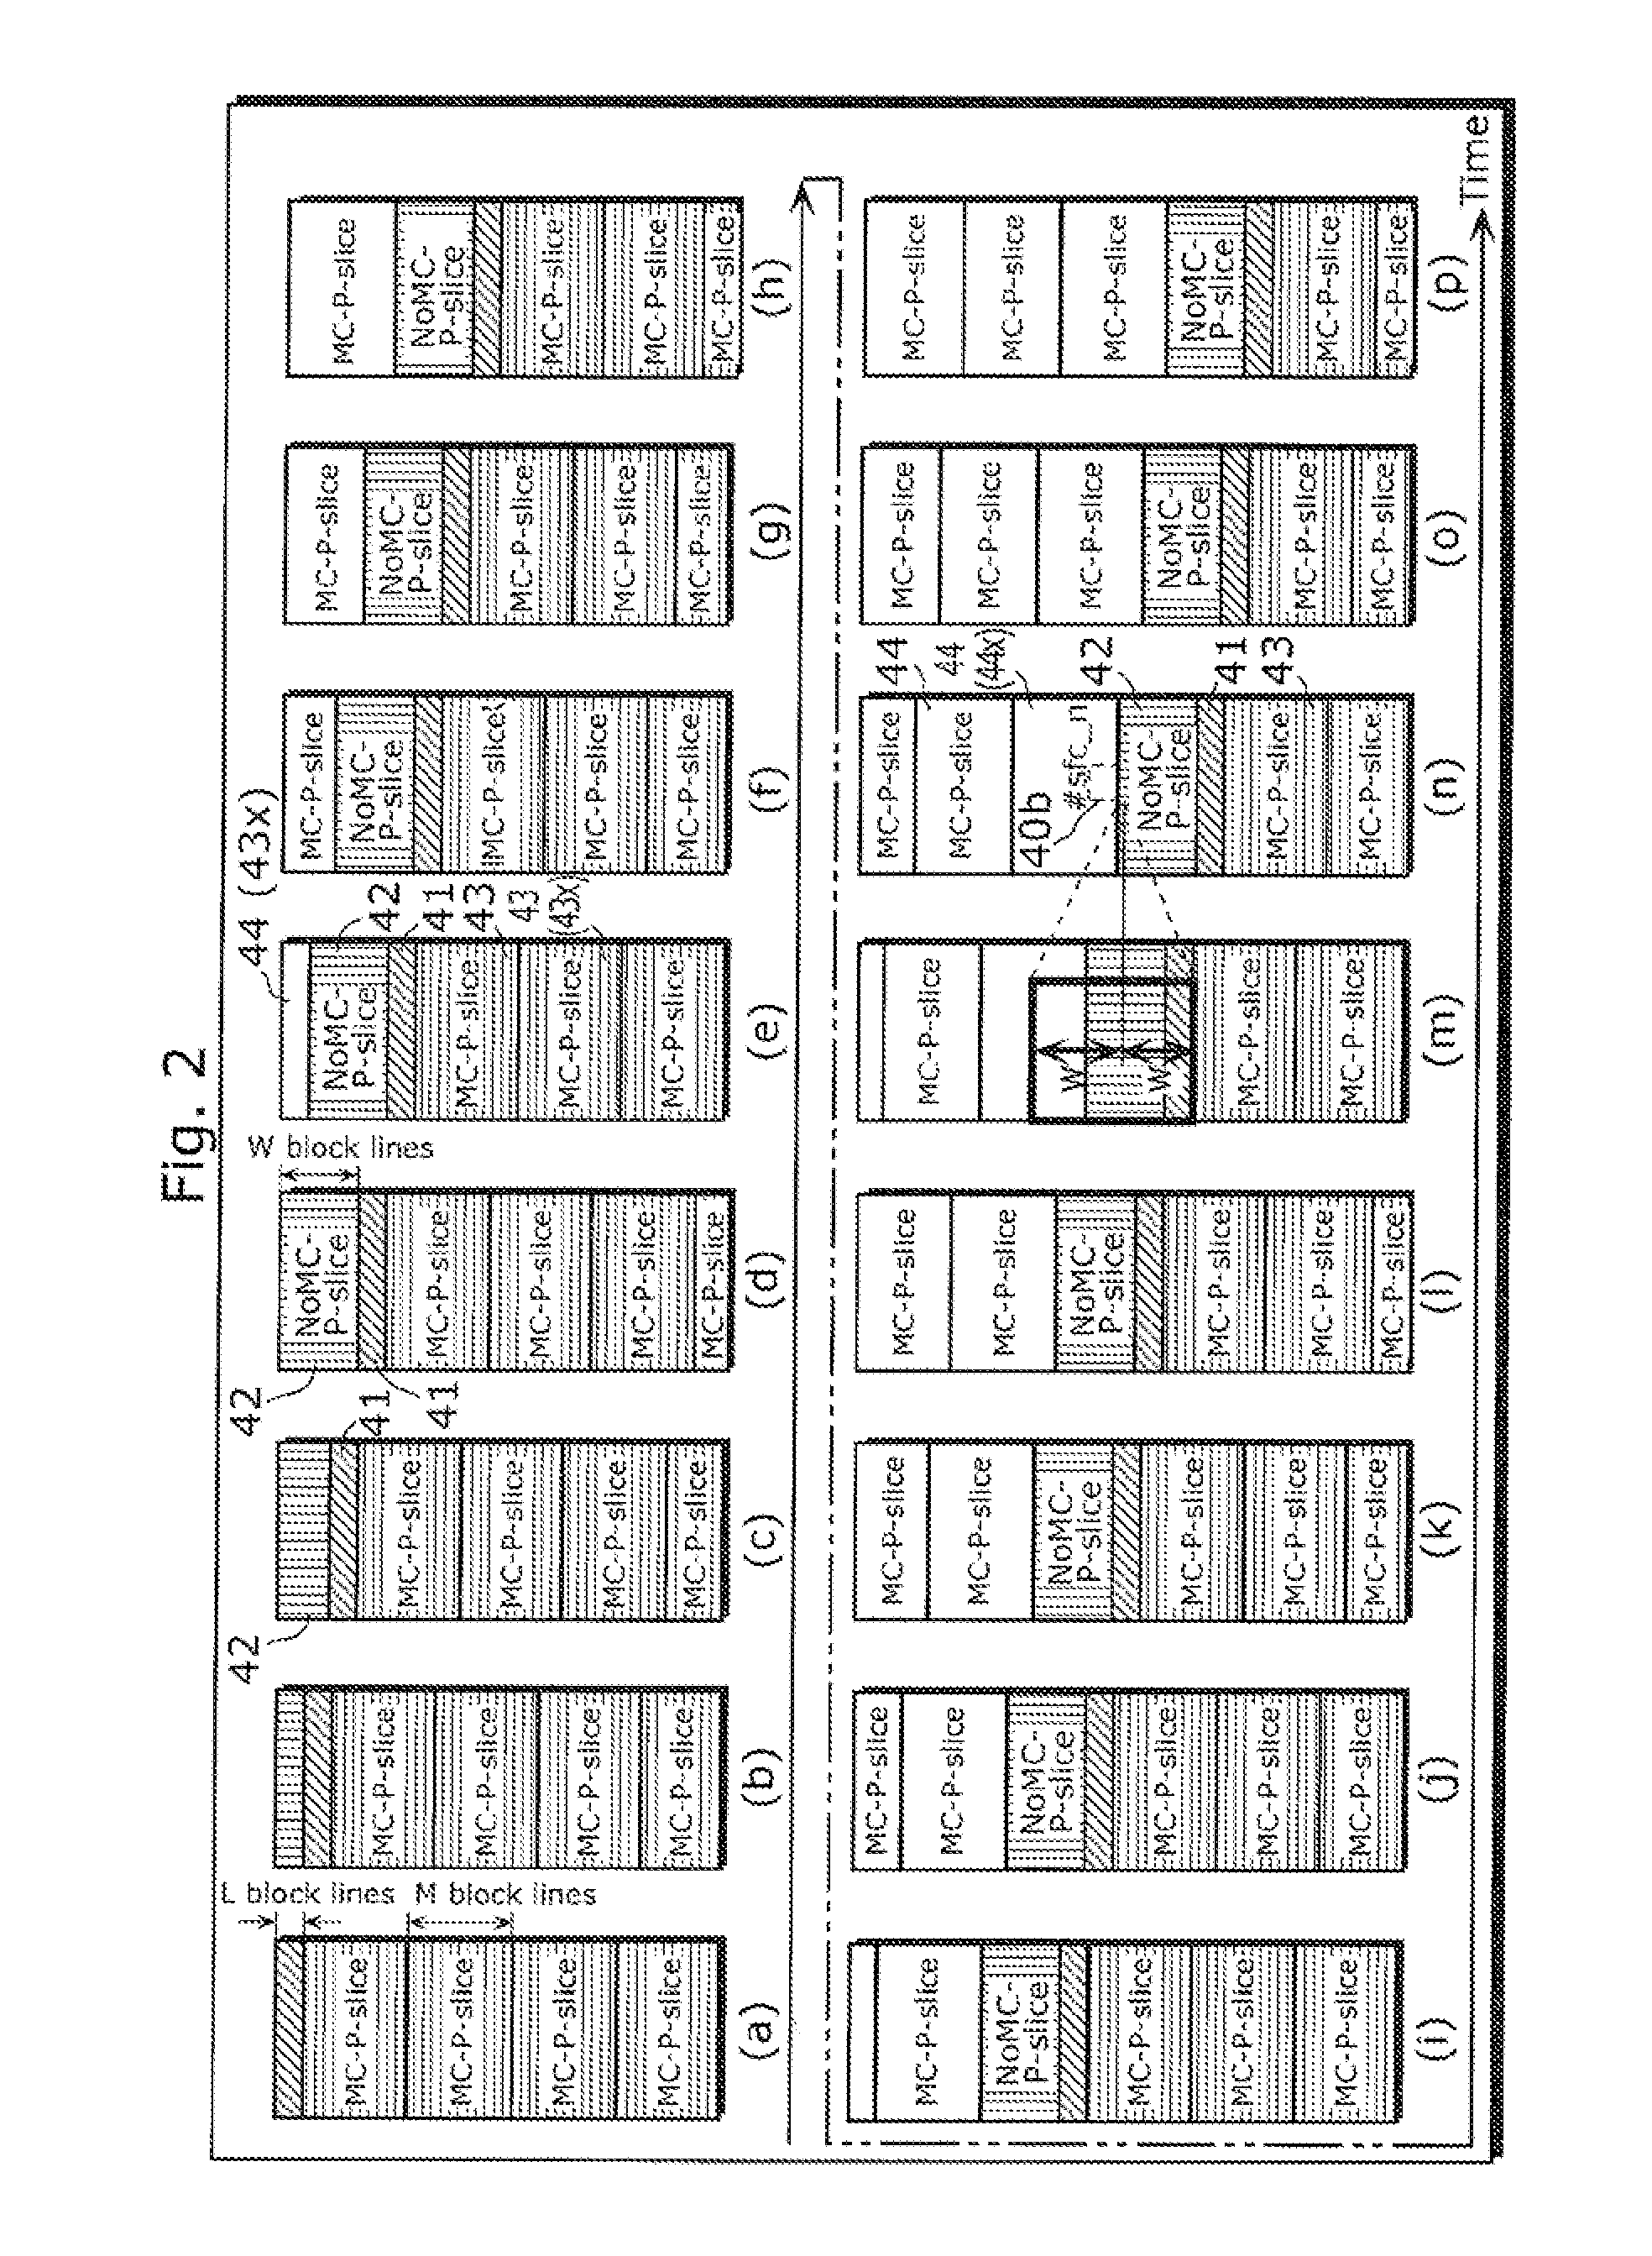 Moving picture coding method, apparatus, program, and integrated circuit